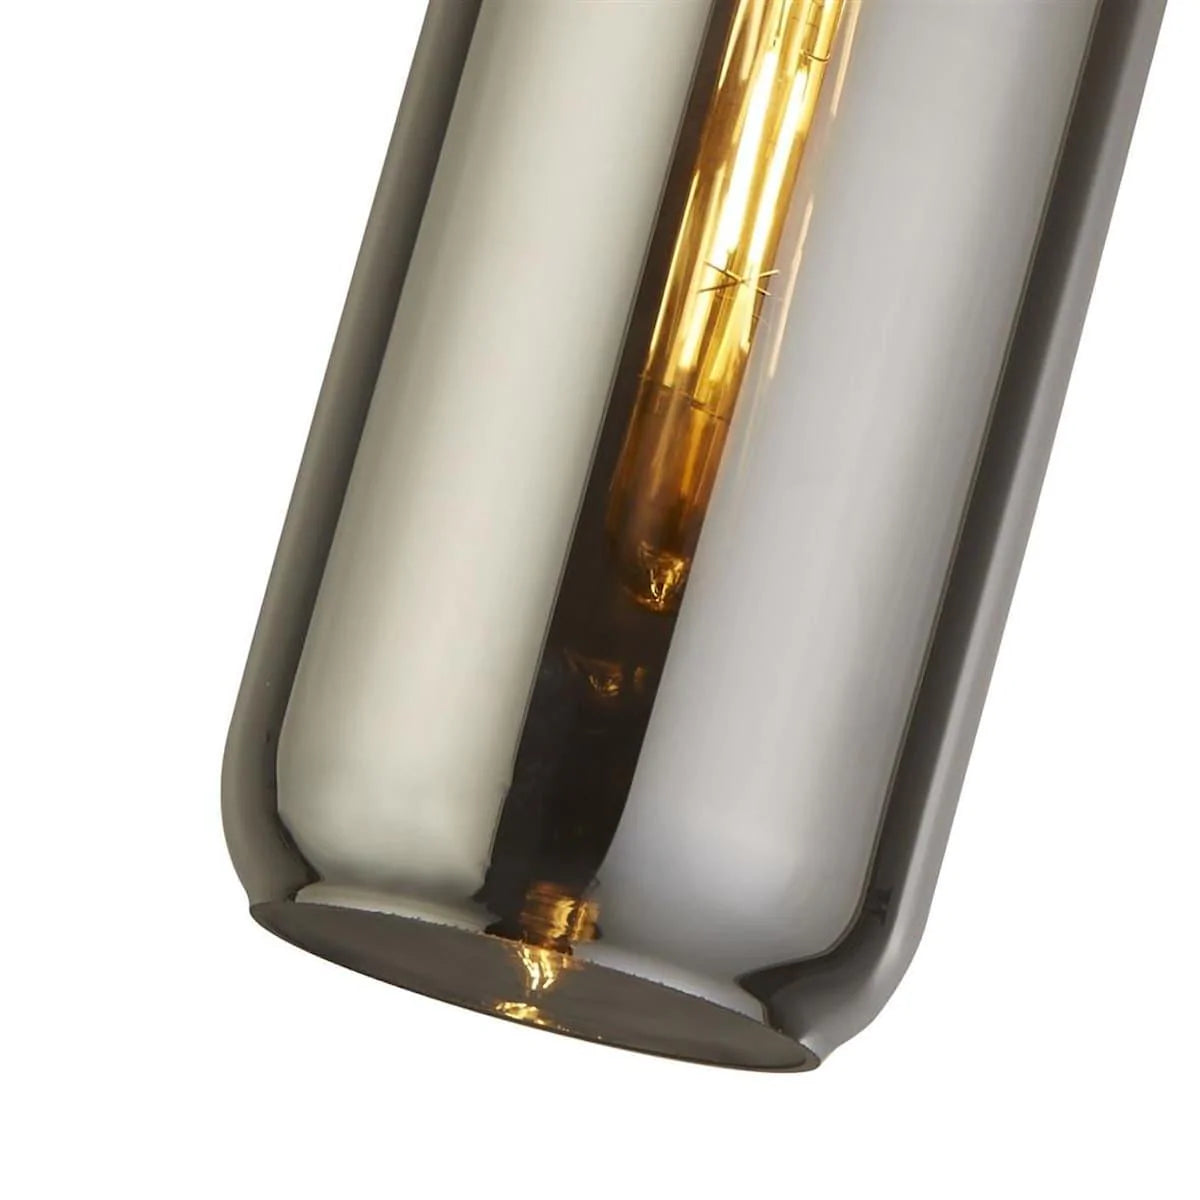 PIPETTE CEILING PENDANT - BRASS & SMOKED GLASS 46641-1SM - Peter Murphy Lighting & Electrical Ltd